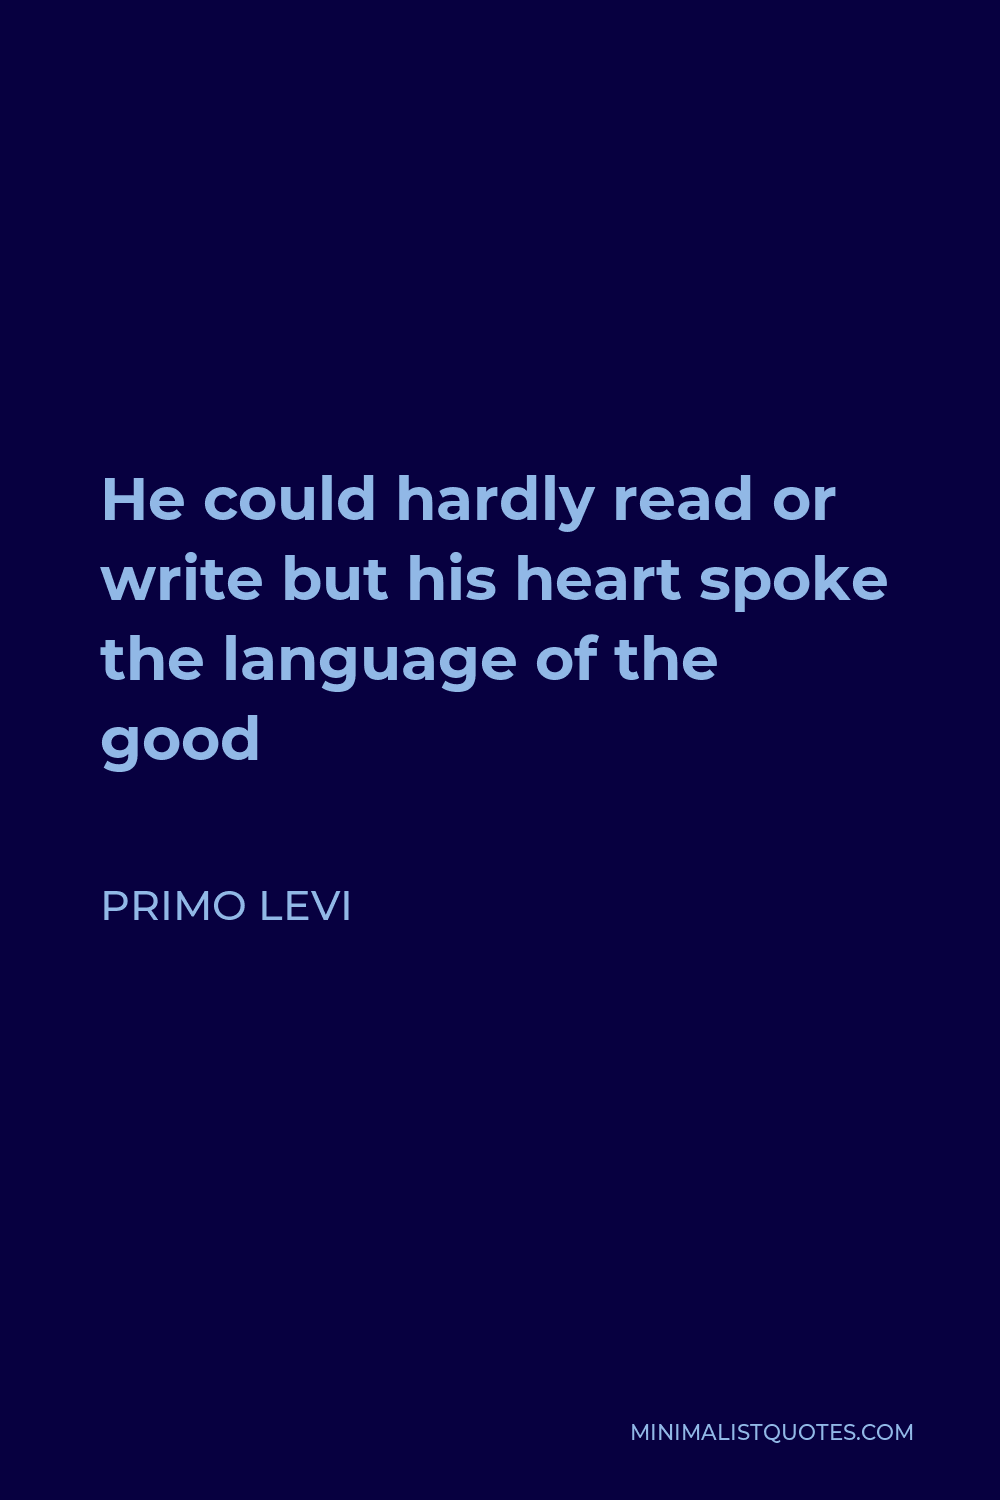 Primo Levi Quote - He could hardly read or write but his heart spoke the language of the good